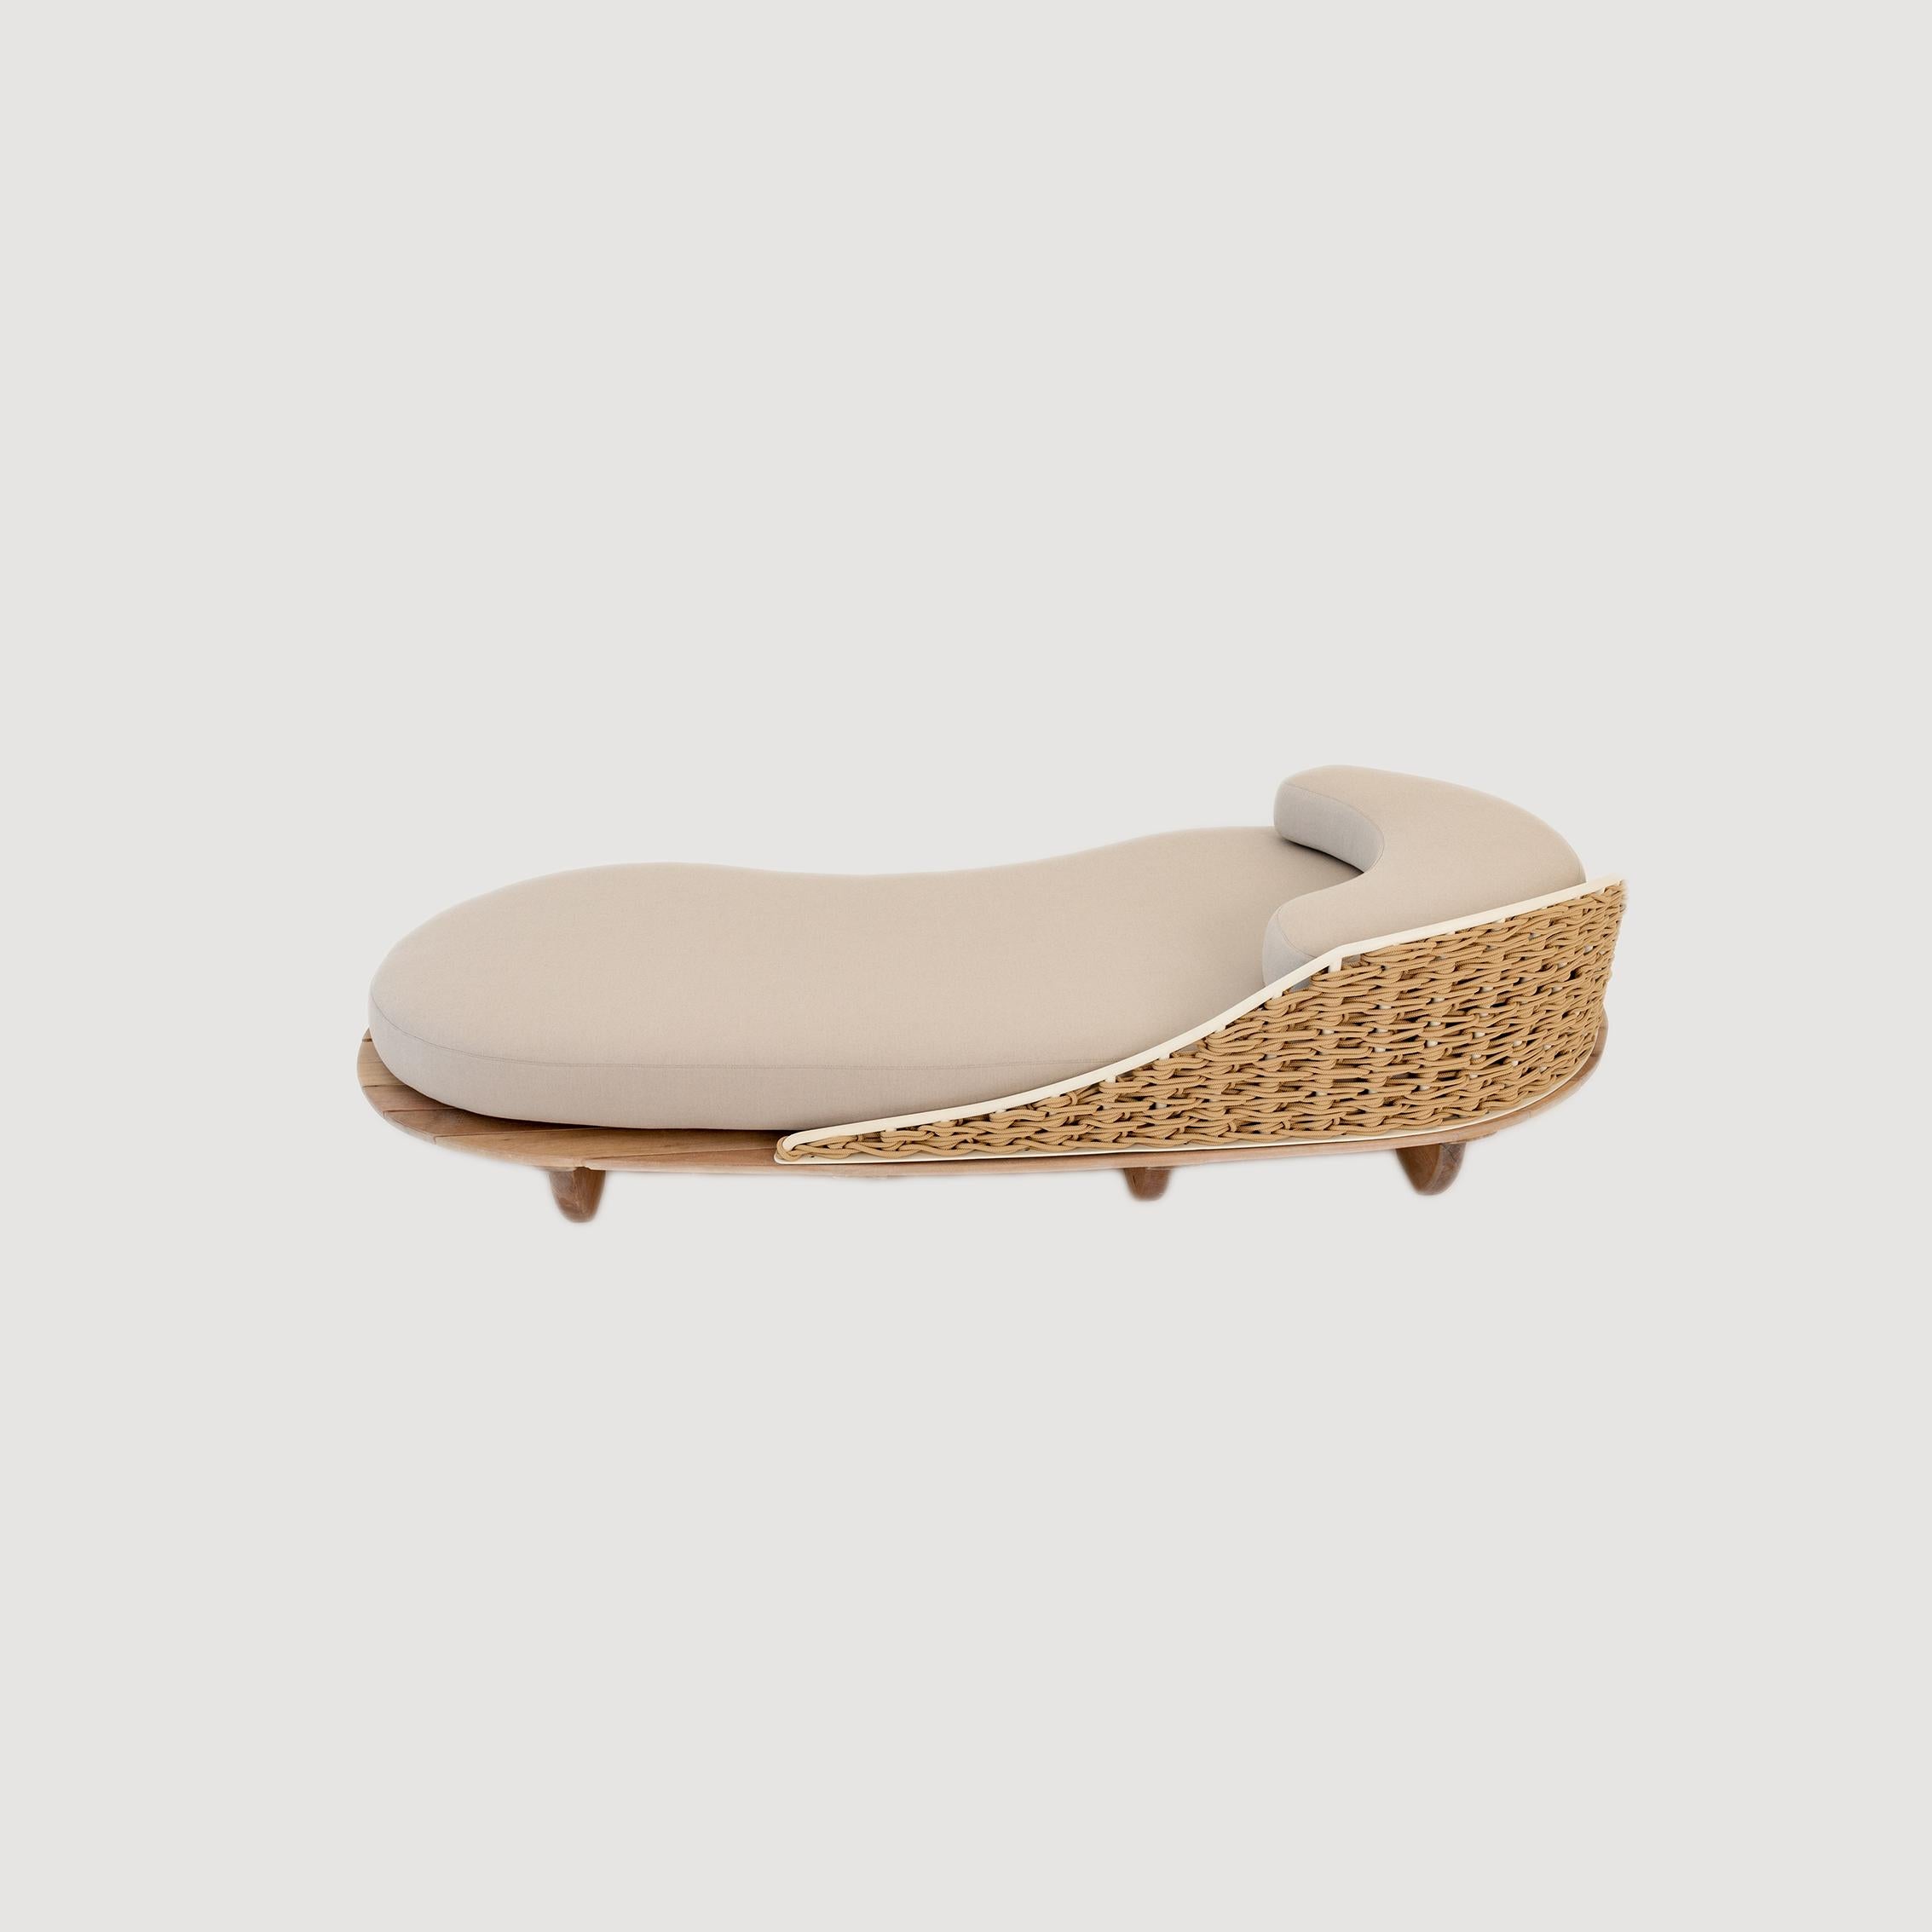 The Sayari Indoor / Outdoor Daybed Chaise Collection by Studio Lloyd For Sale 4